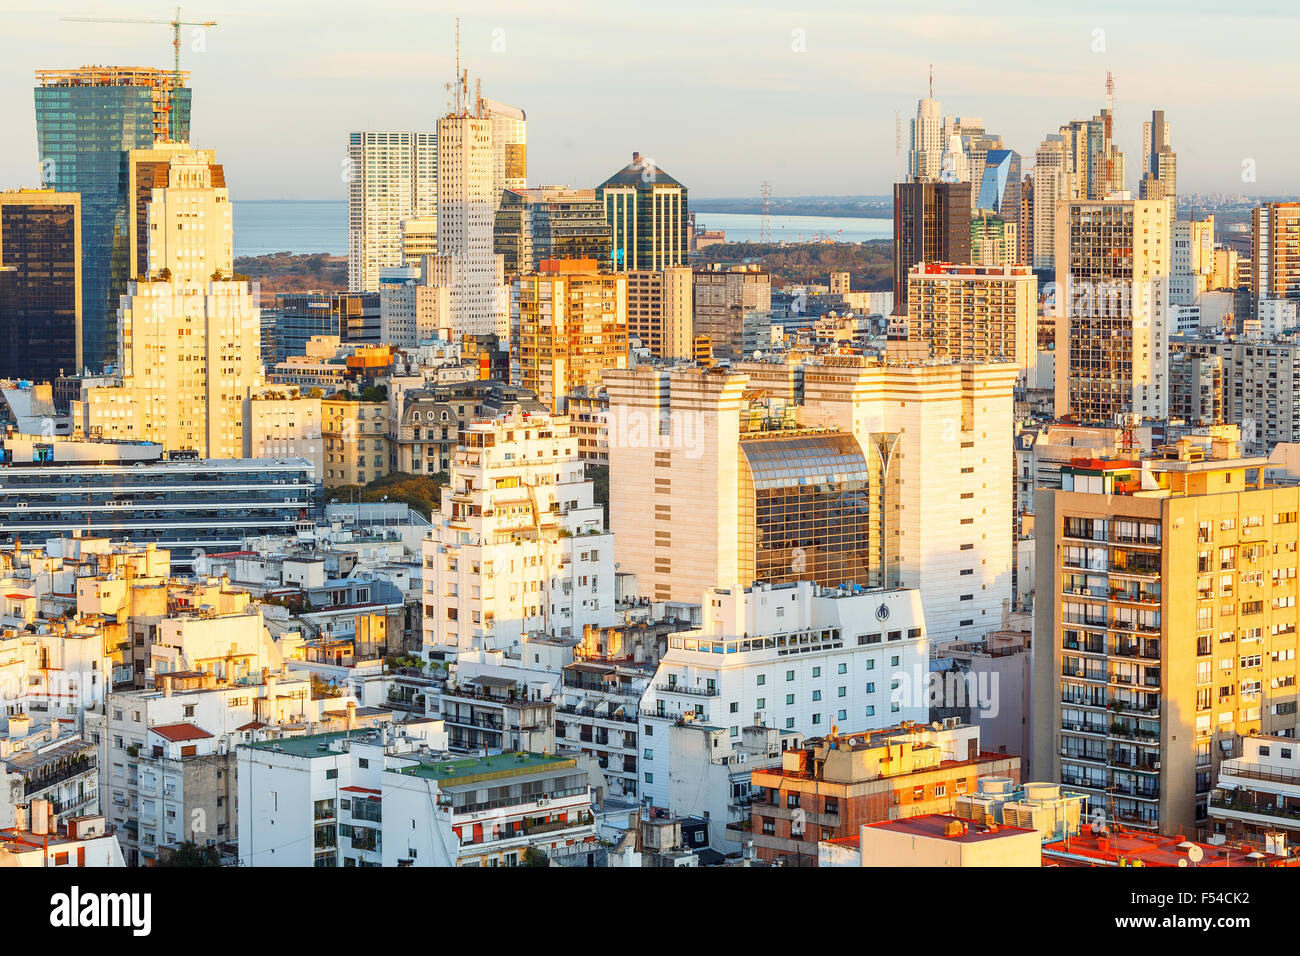 Buenos Aires Skyline High Resolution Stock Photography and Images - Alamy